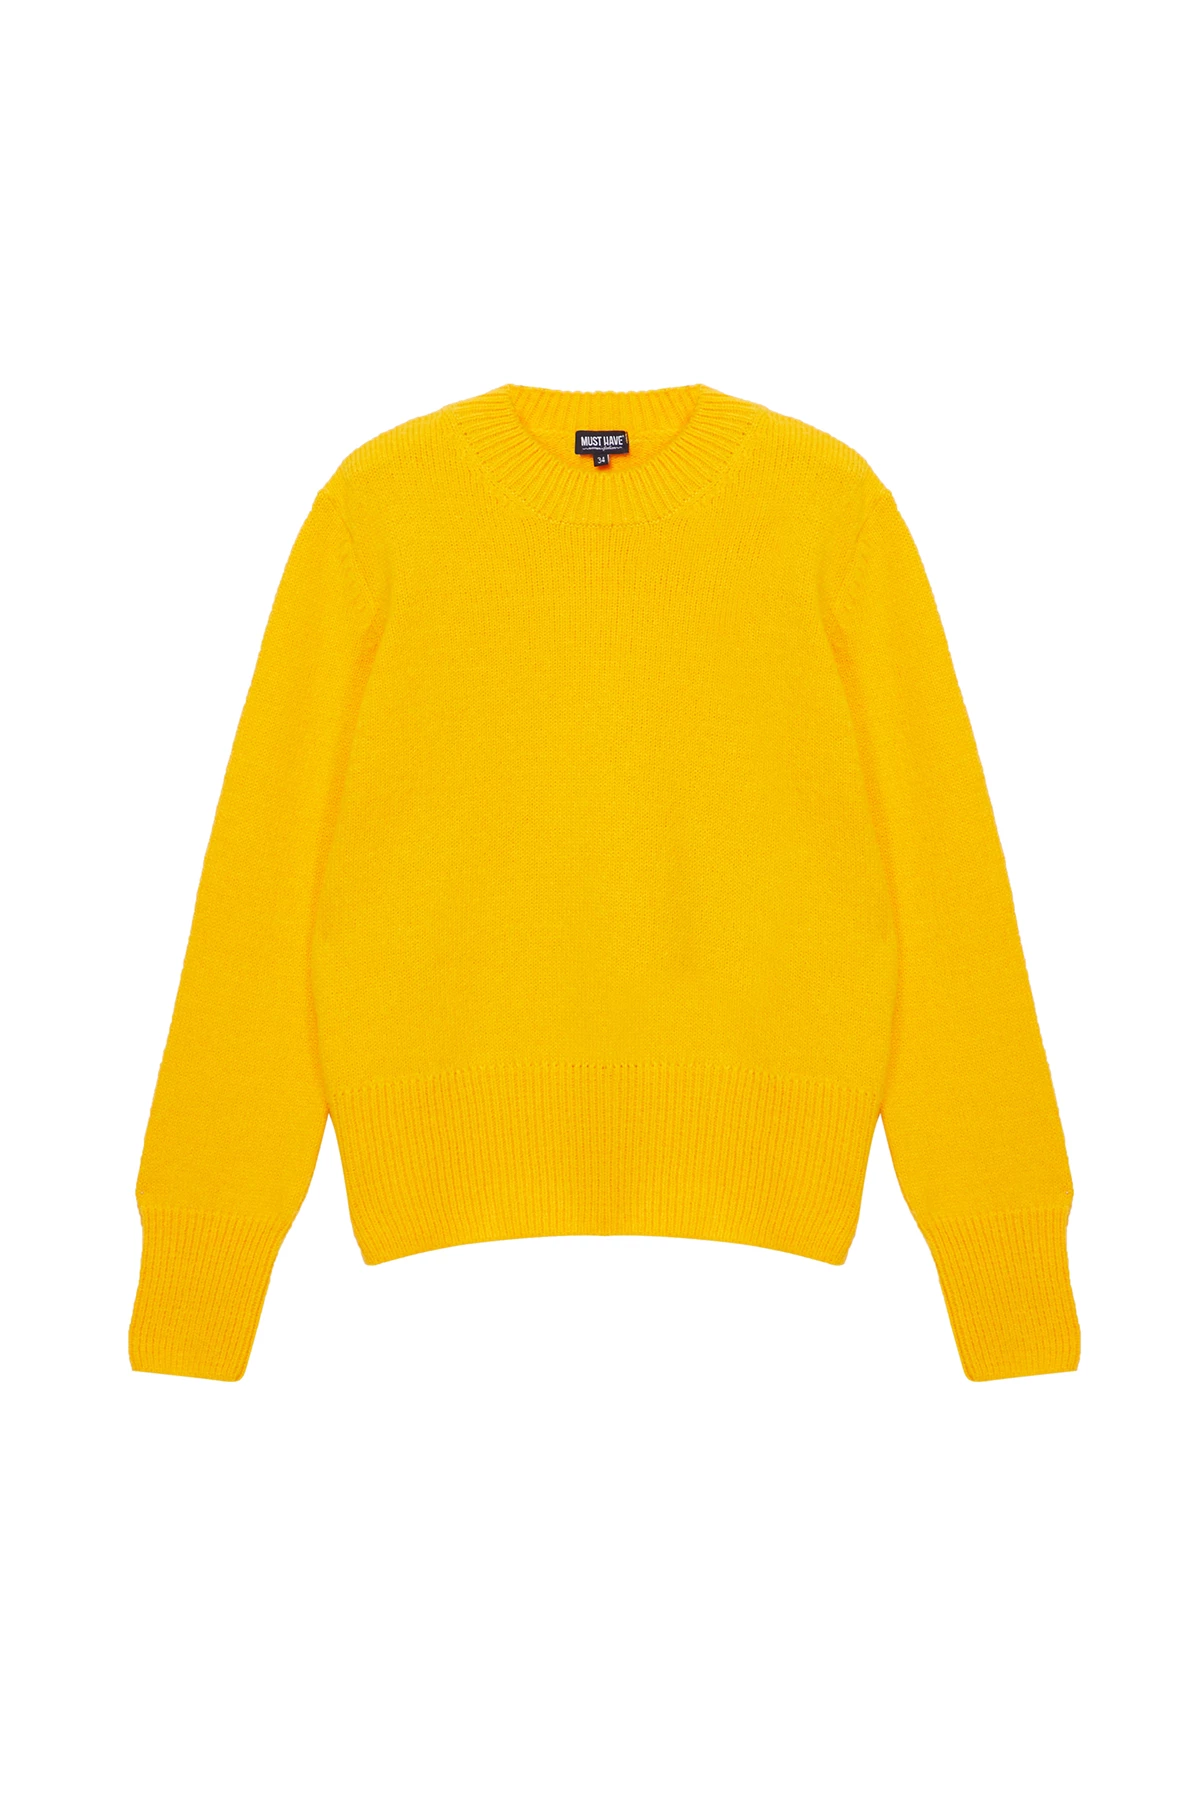 Yellow knitted basic sweater with wool, photo 6